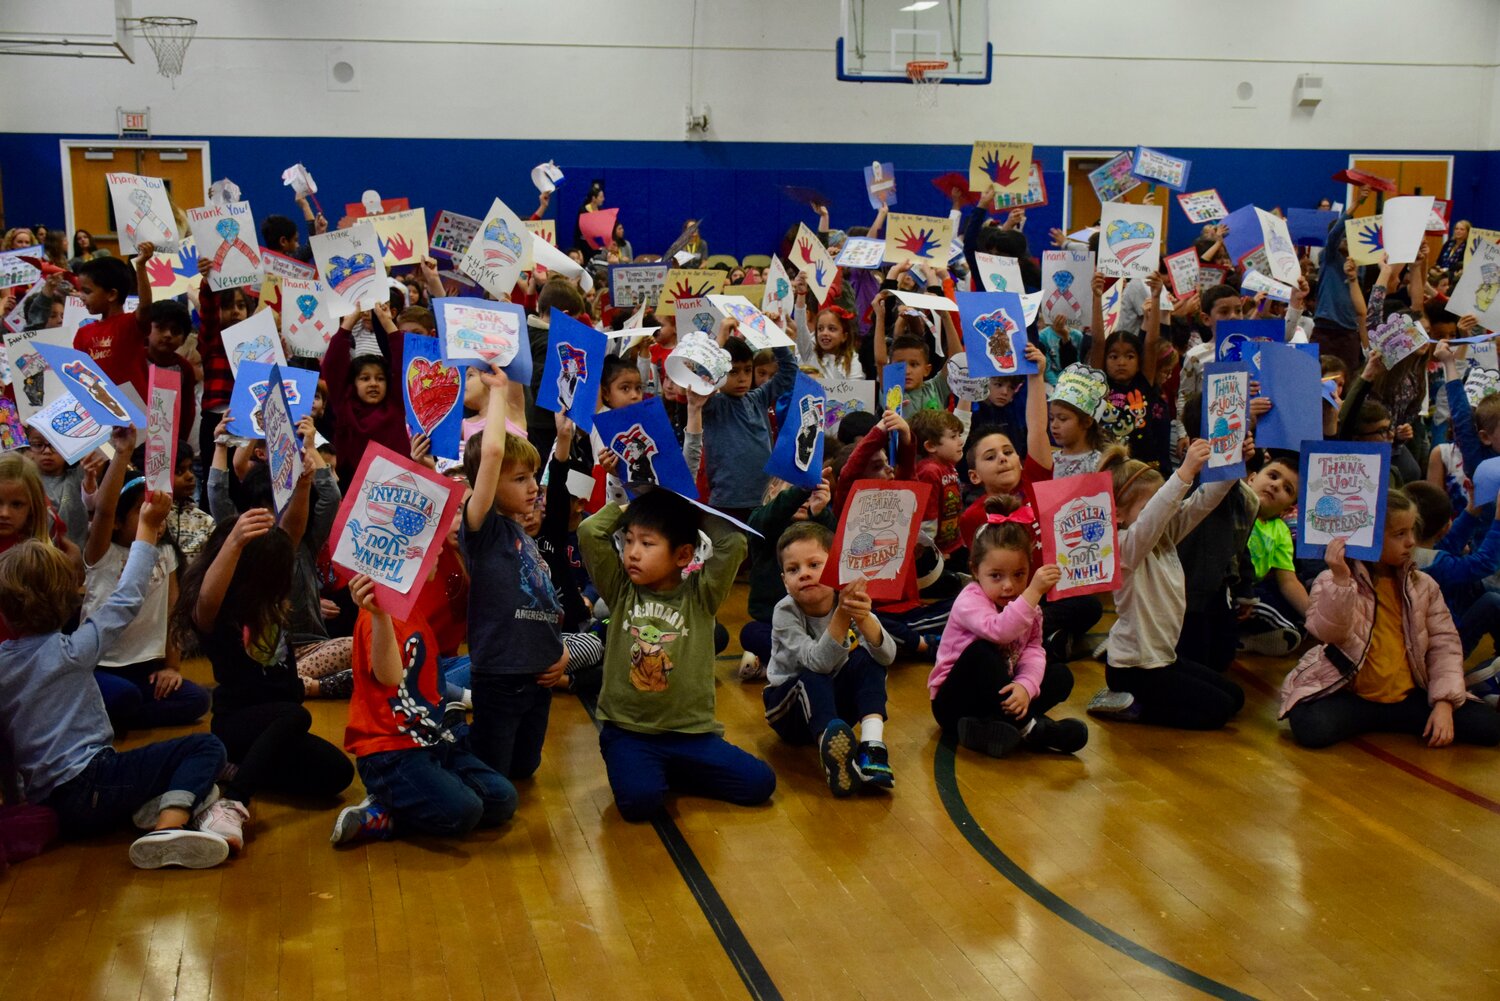 Students held up their artwork at the assembly held at Washington Street School last week as the school community celebrated and honored veterans.